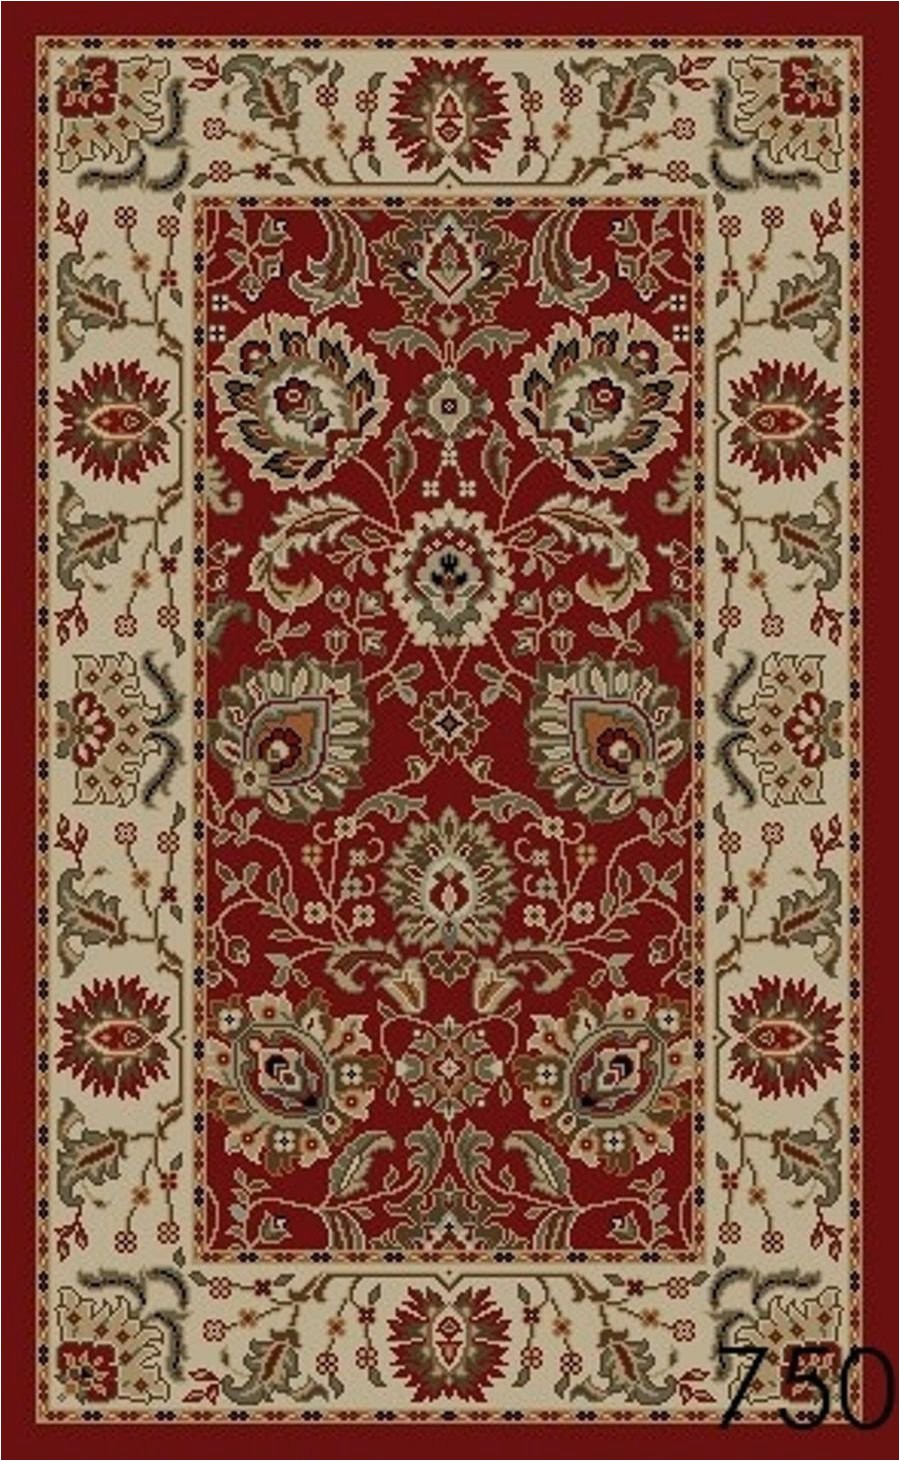 5×7 Rubber Backed area Rug Buy 5 X 7 Red New Tabriz Red Floral Design Rubber